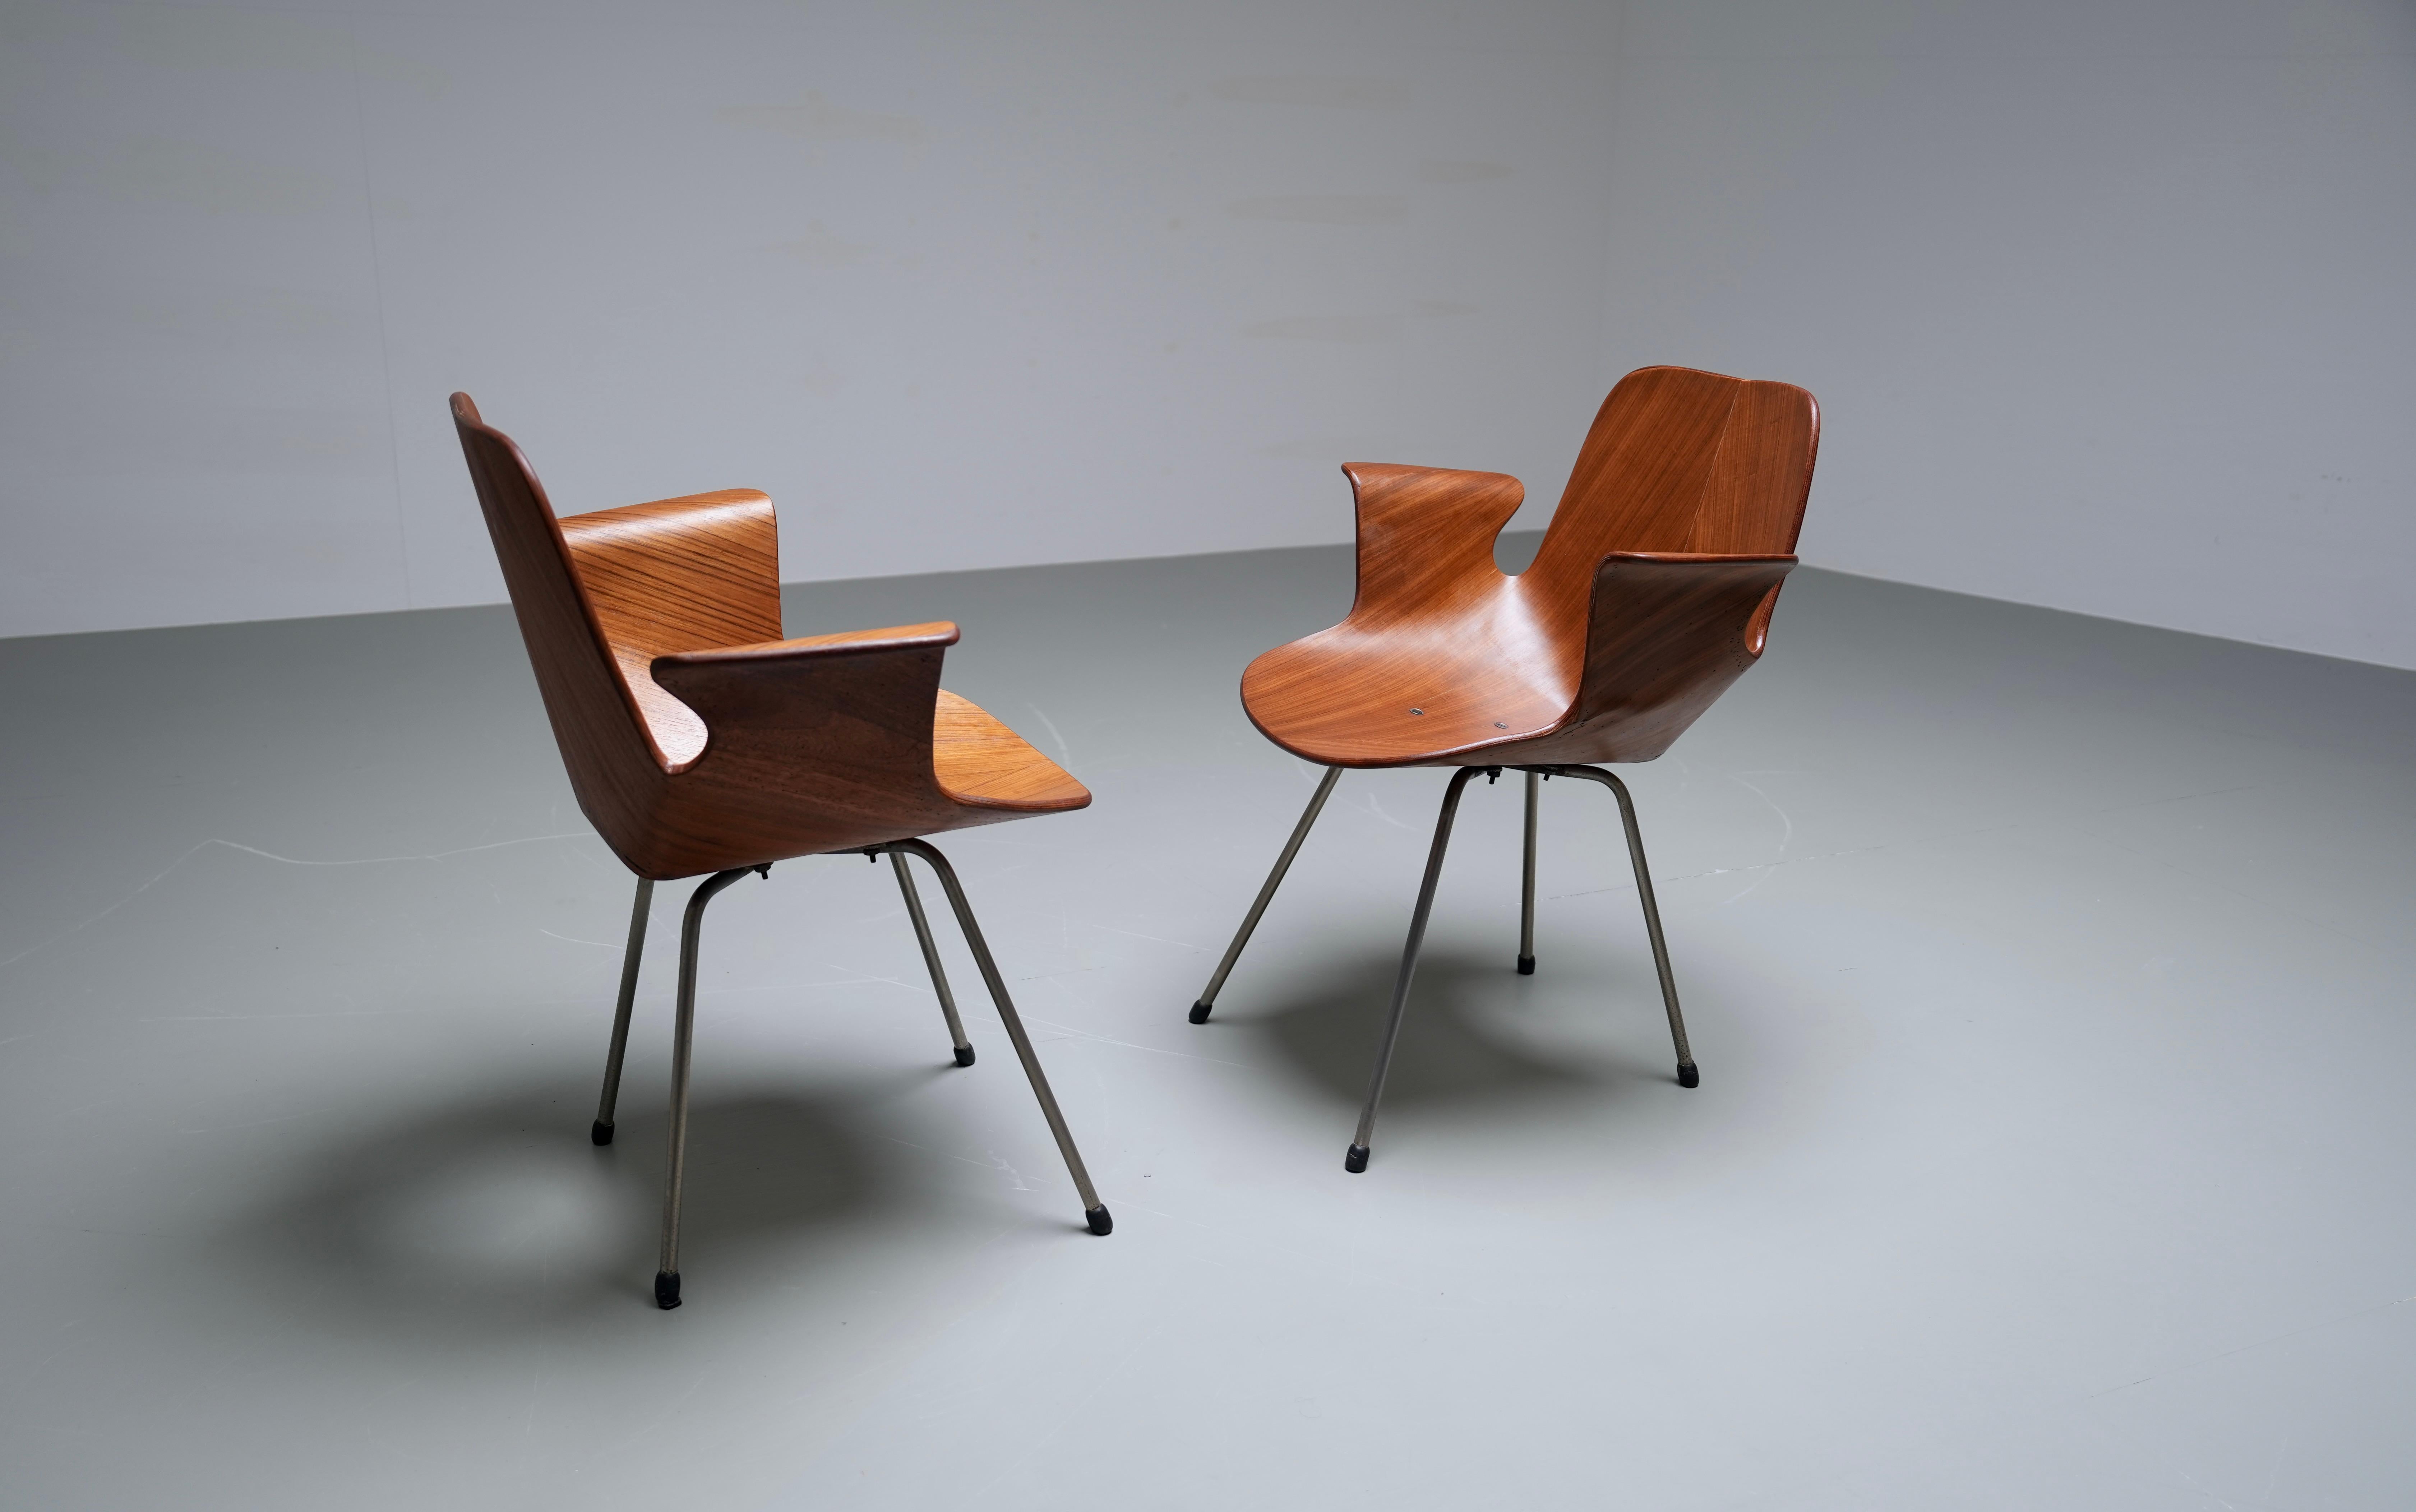 Italian Set of 2 Medea Armchairs by Vittorio Nobili for Fratelli Tagliabue, Italy, 1955 For Sale